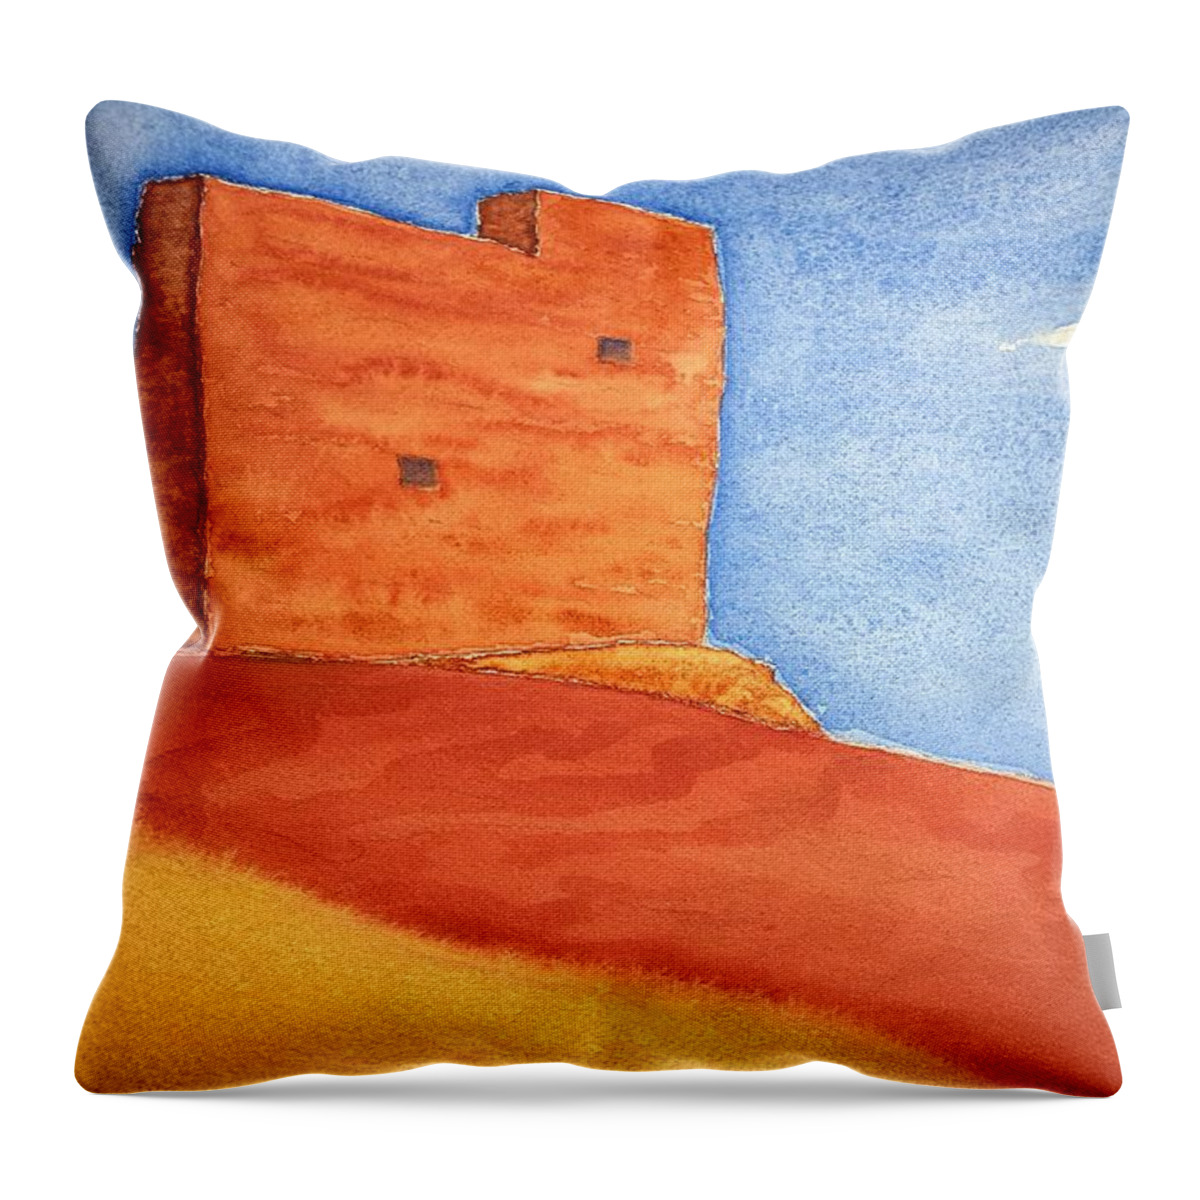 Watercolor Throw Pillow featuring the painting Wall of Lore by John Klobucher